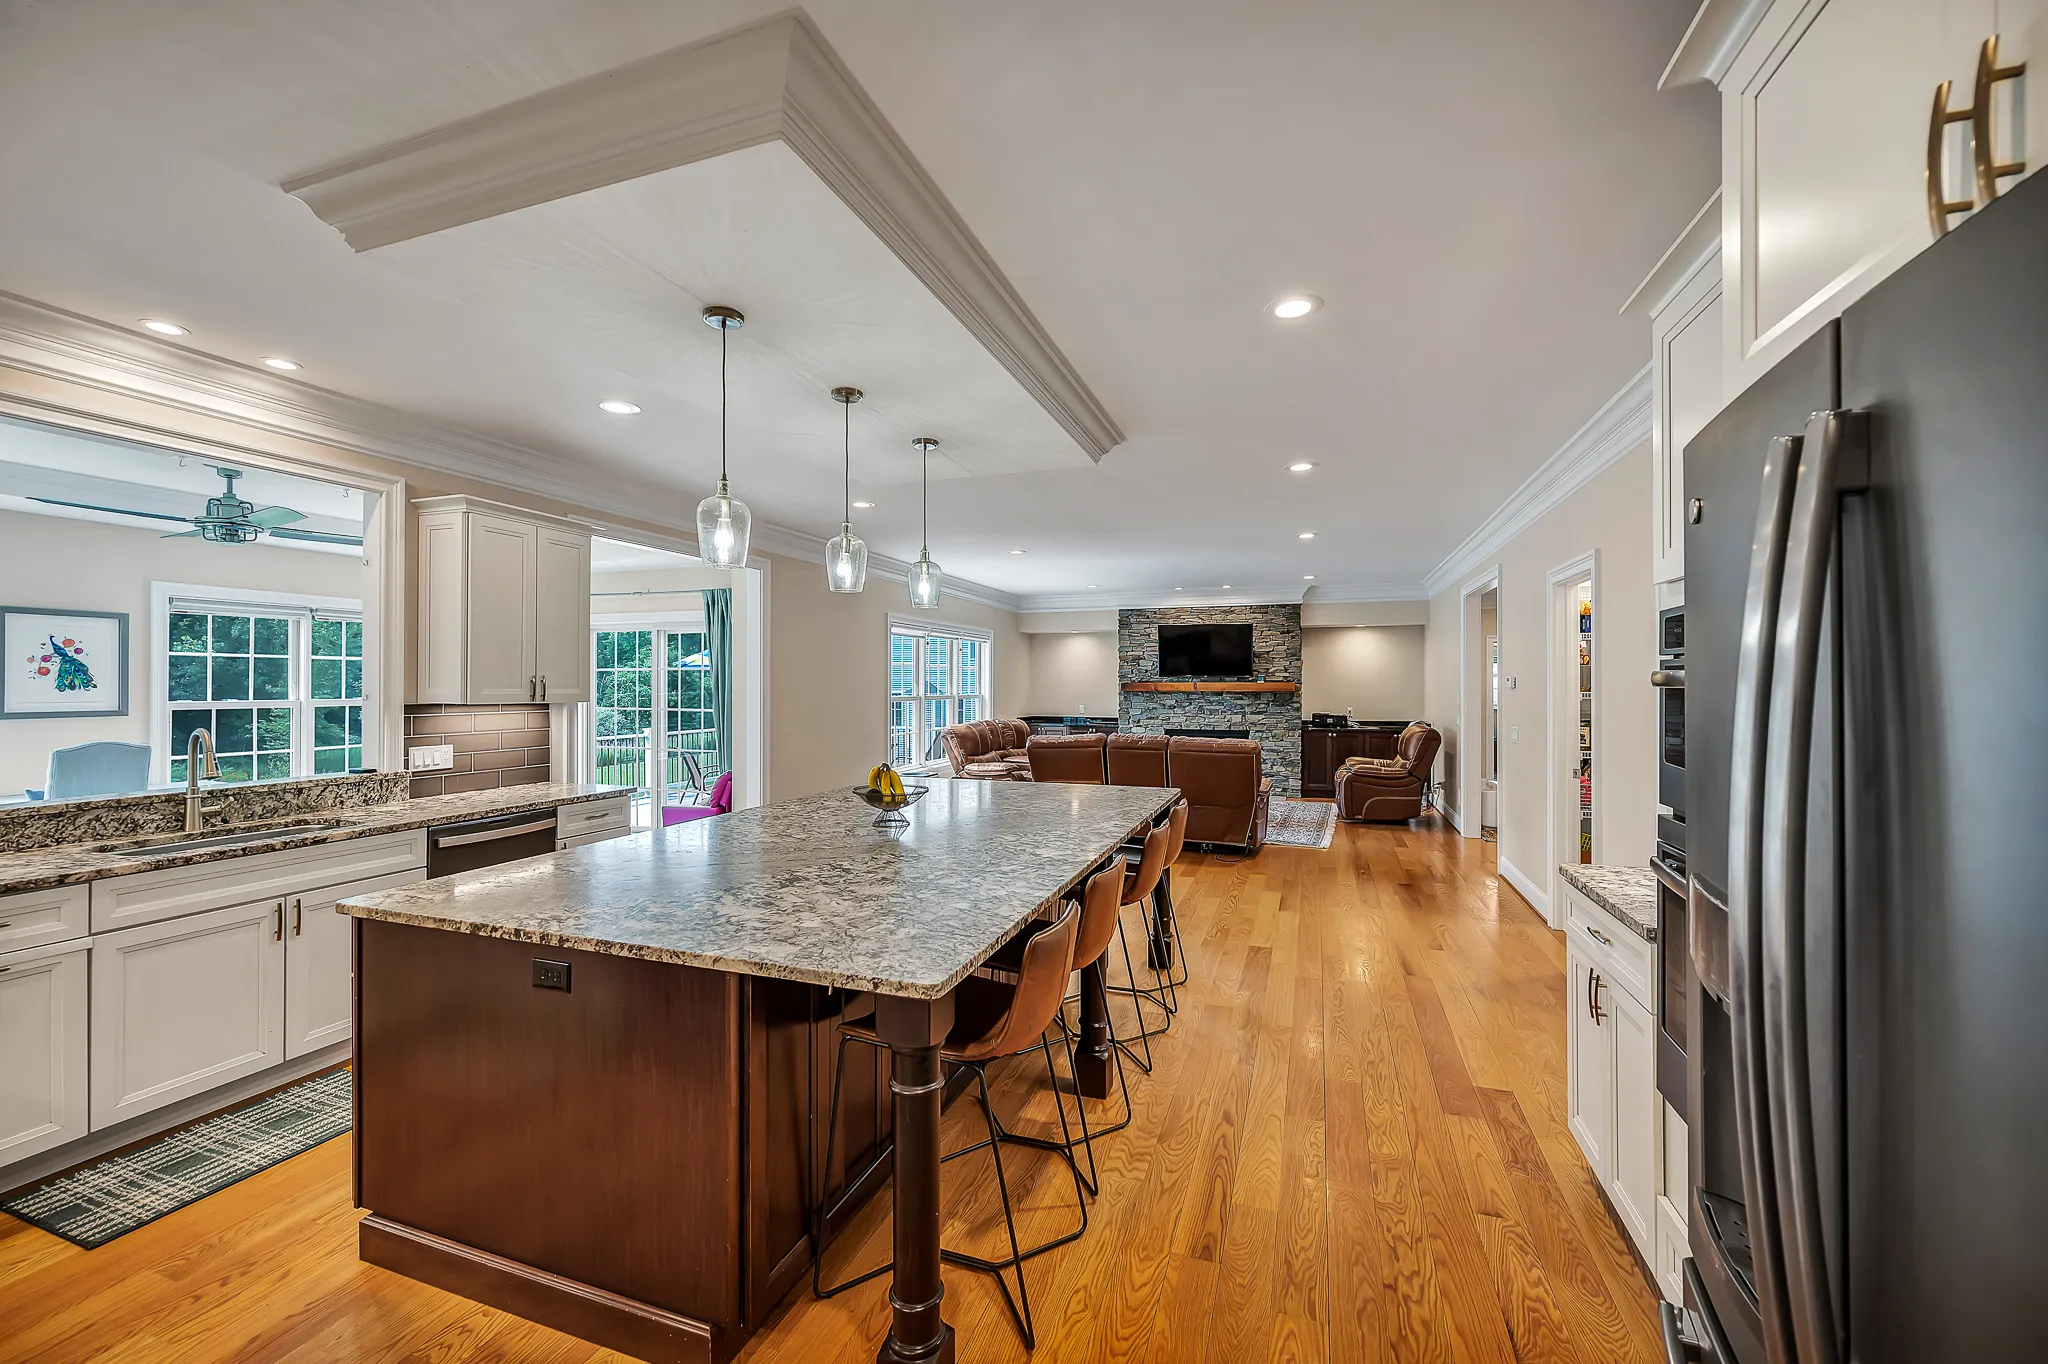 Beautiful kitchen island seating real estate photo in Middletown, CT